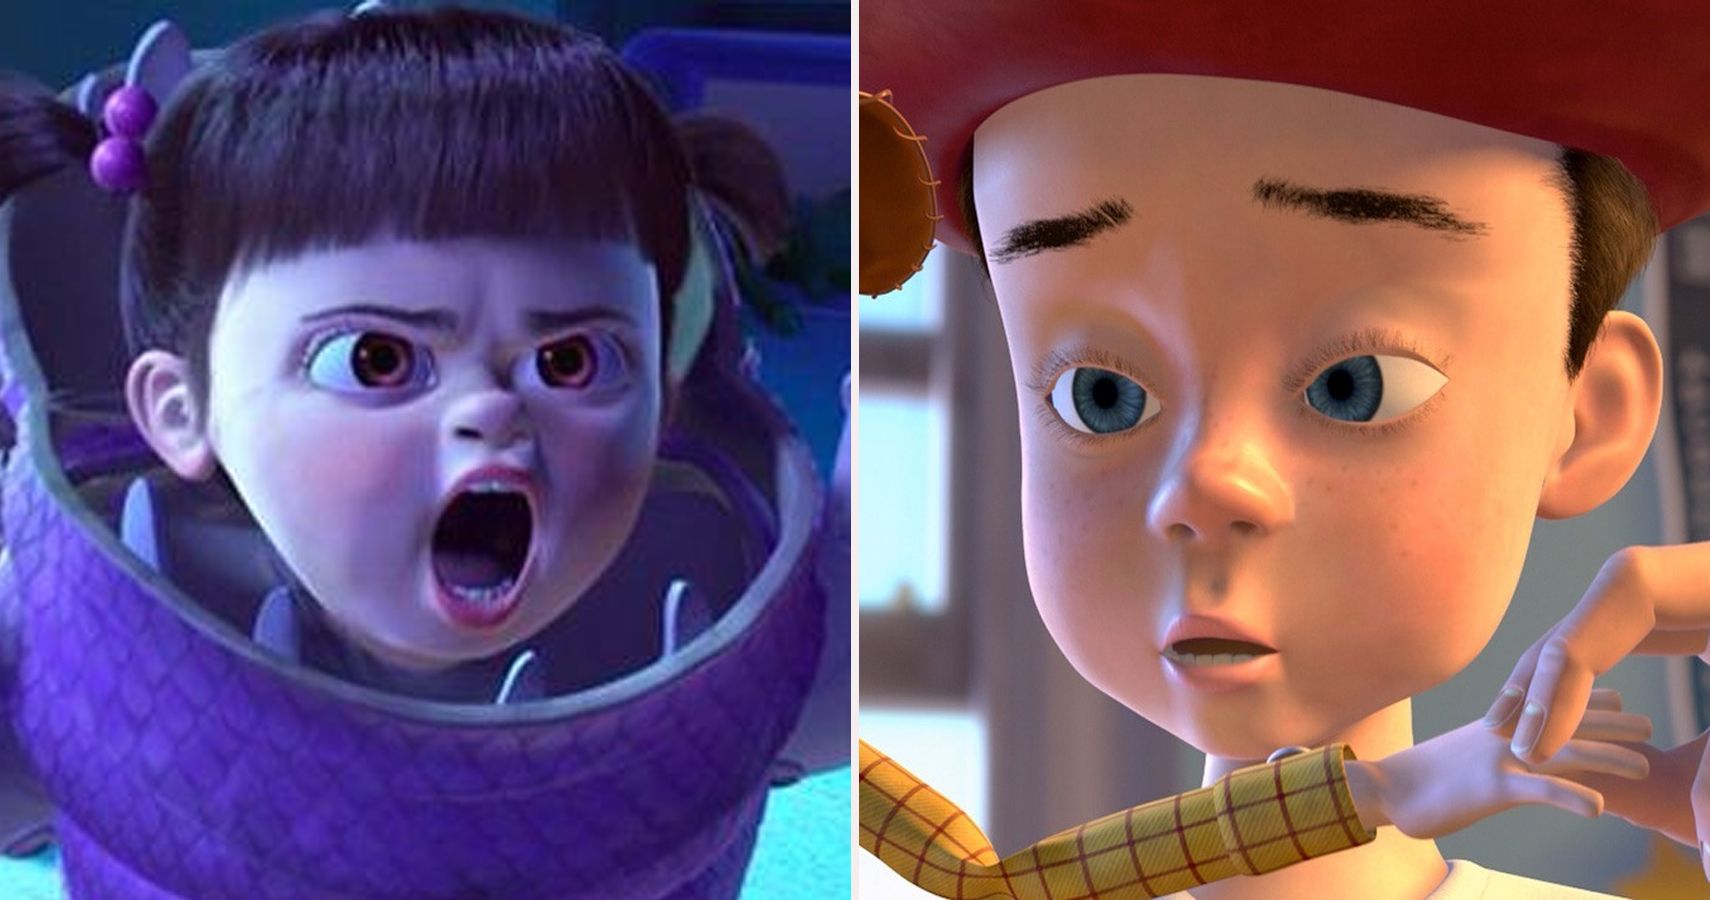 In Toy Story 3, one of the girls at the Sunnyside Daycare is a slightly  older Boo from Monsters, Inc.